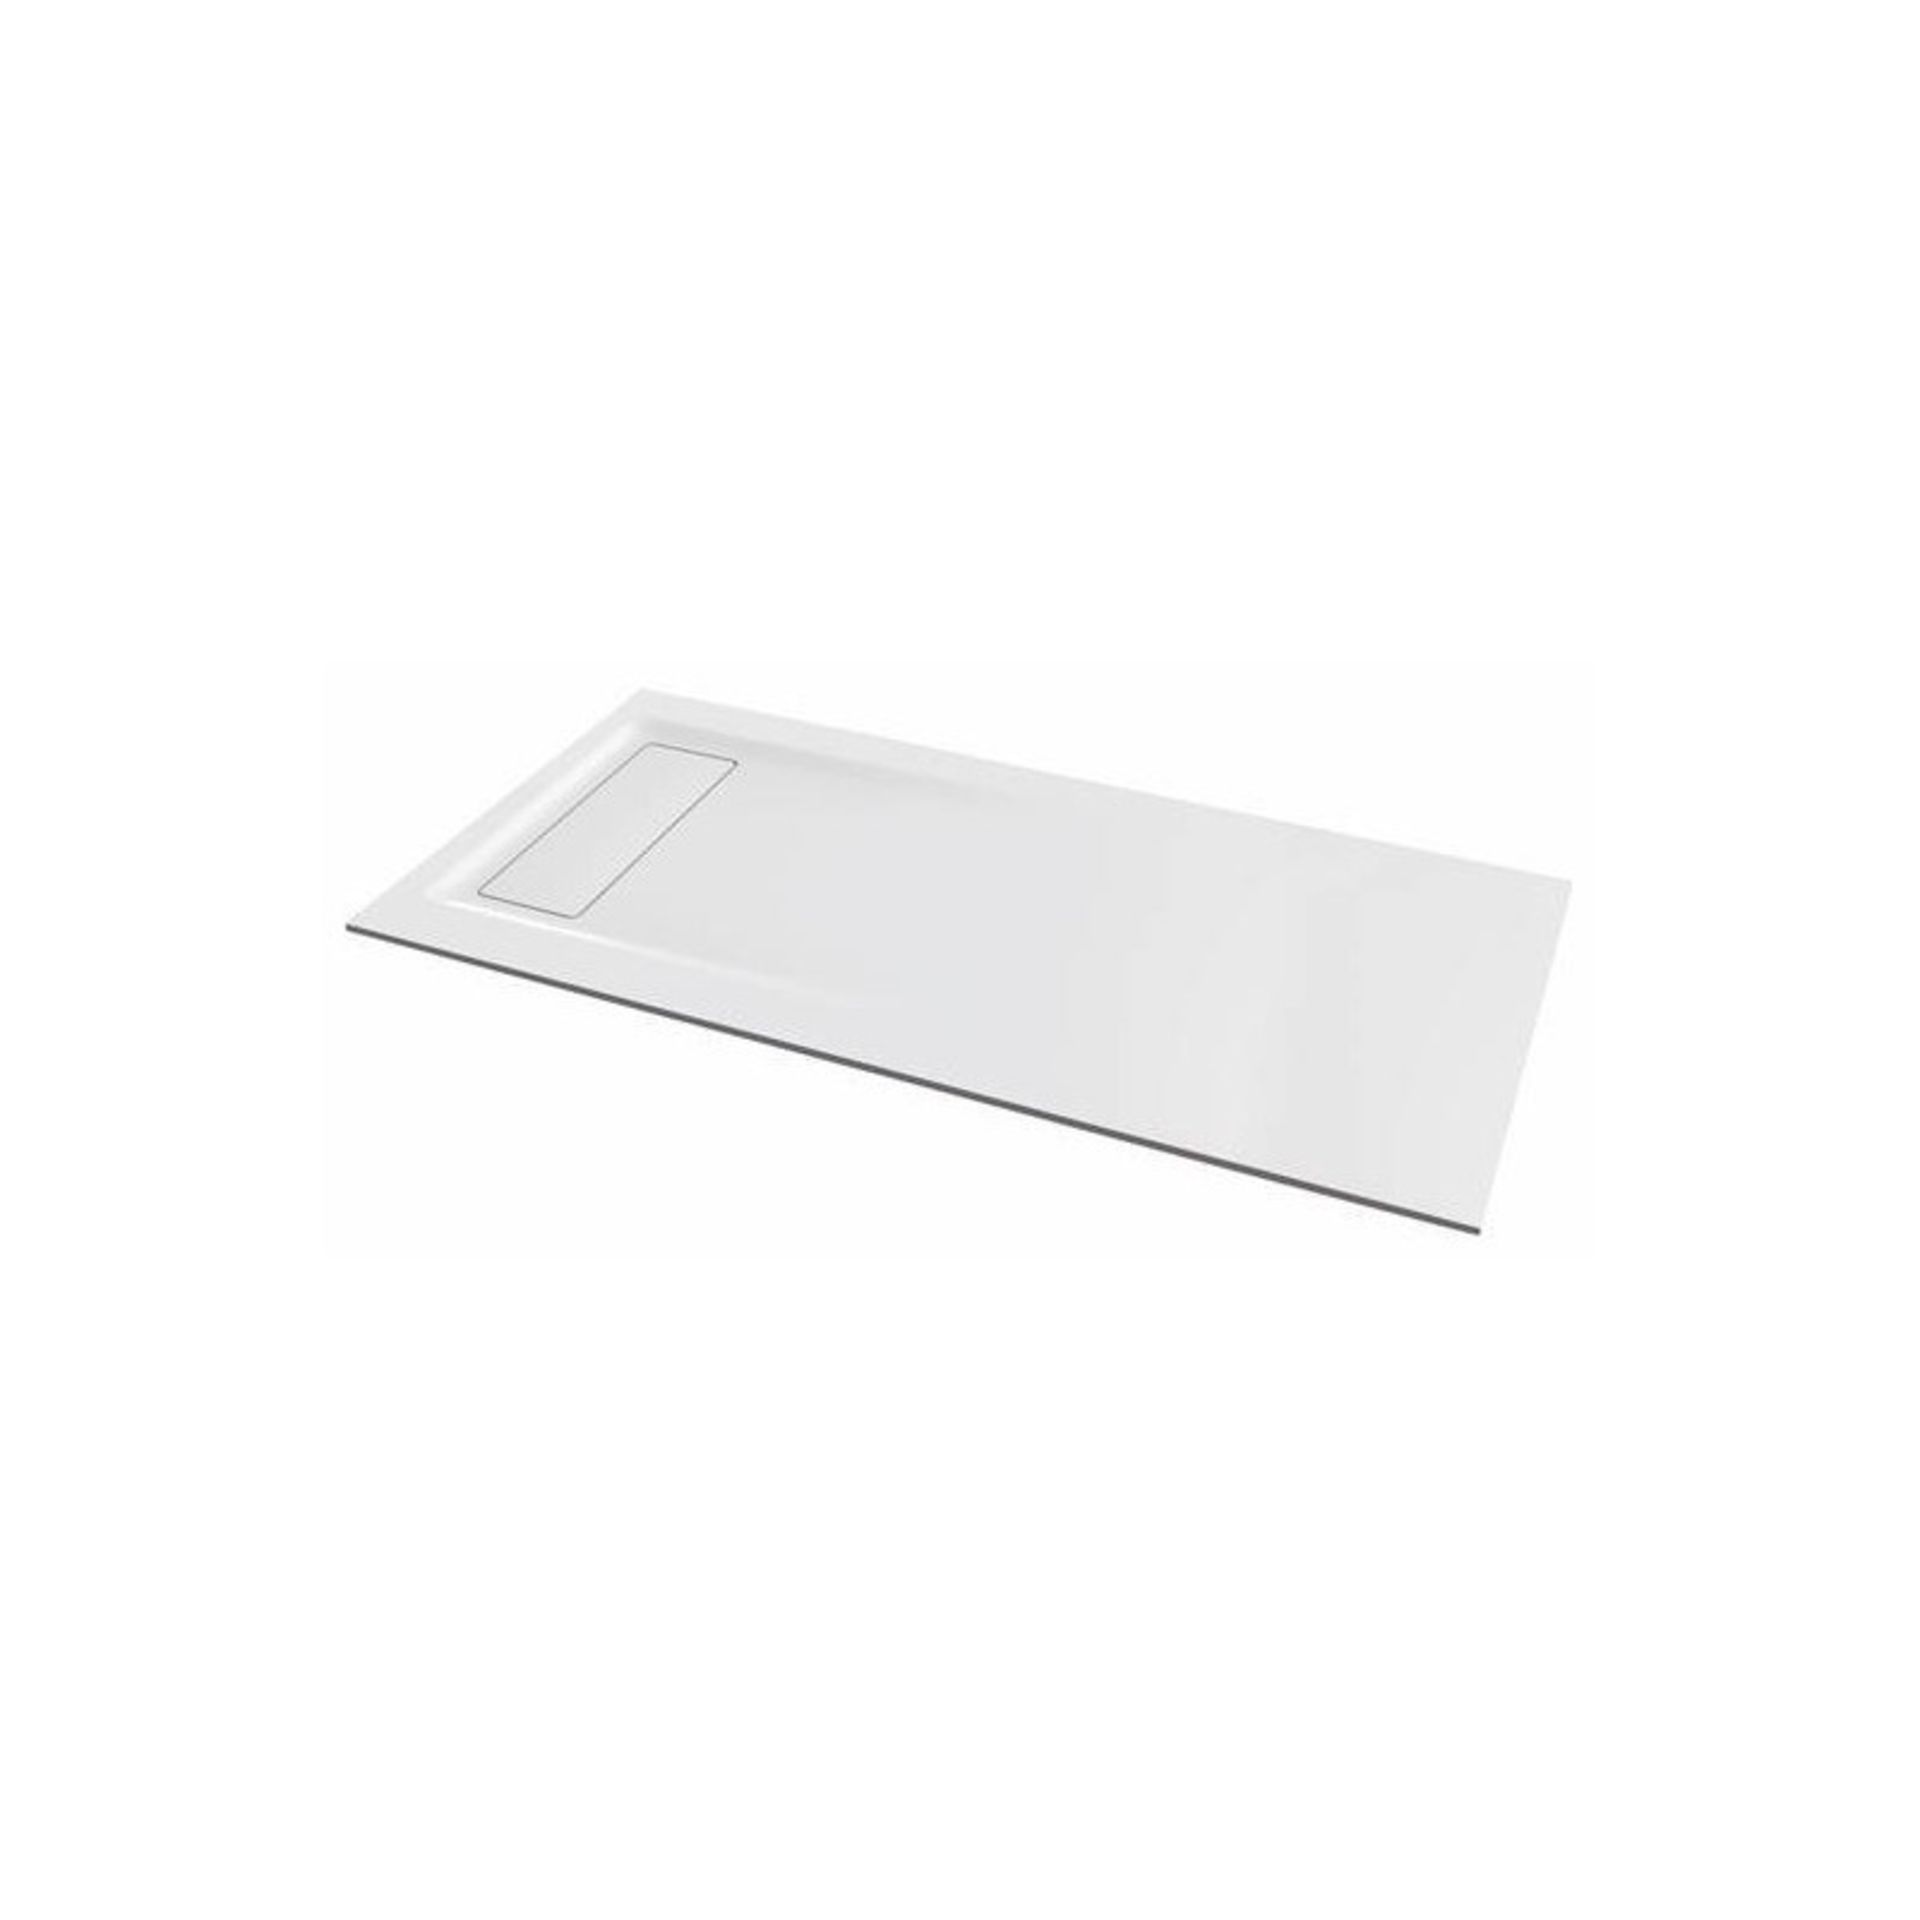 (LV102) Keramag 1200x900mm Opale White Shower Tray. RRP £1,479.99.Opale is sober, slender and ... - Image 2 of 3